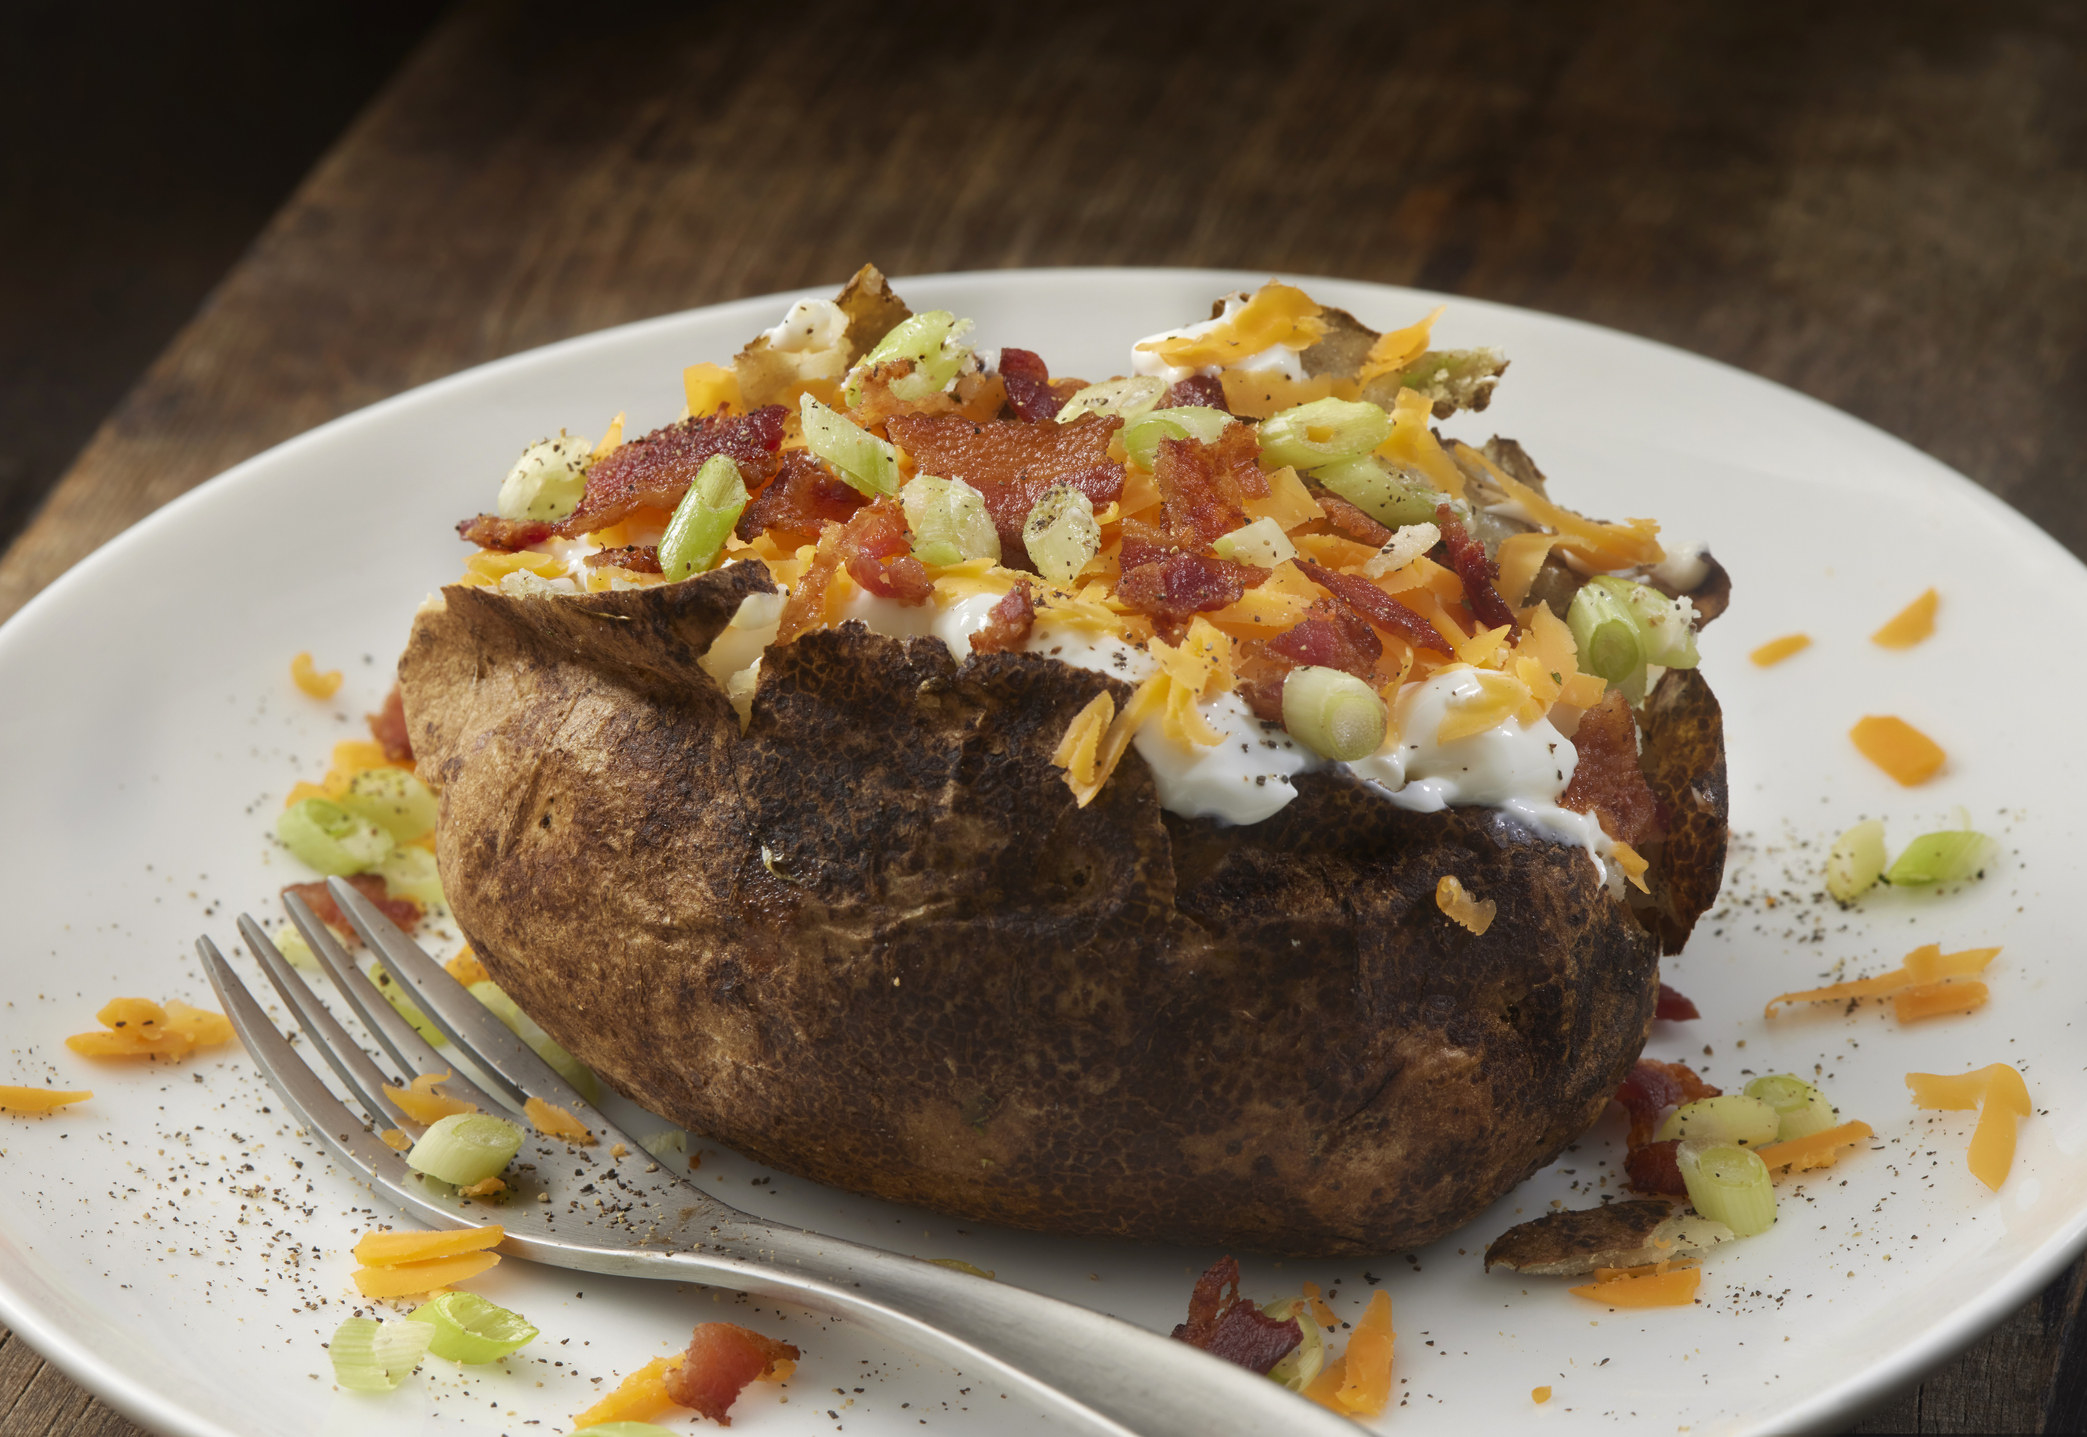 Loaded Baked Potato with Bacon, Sour Cream, Cheddar Cheese and Scallions.